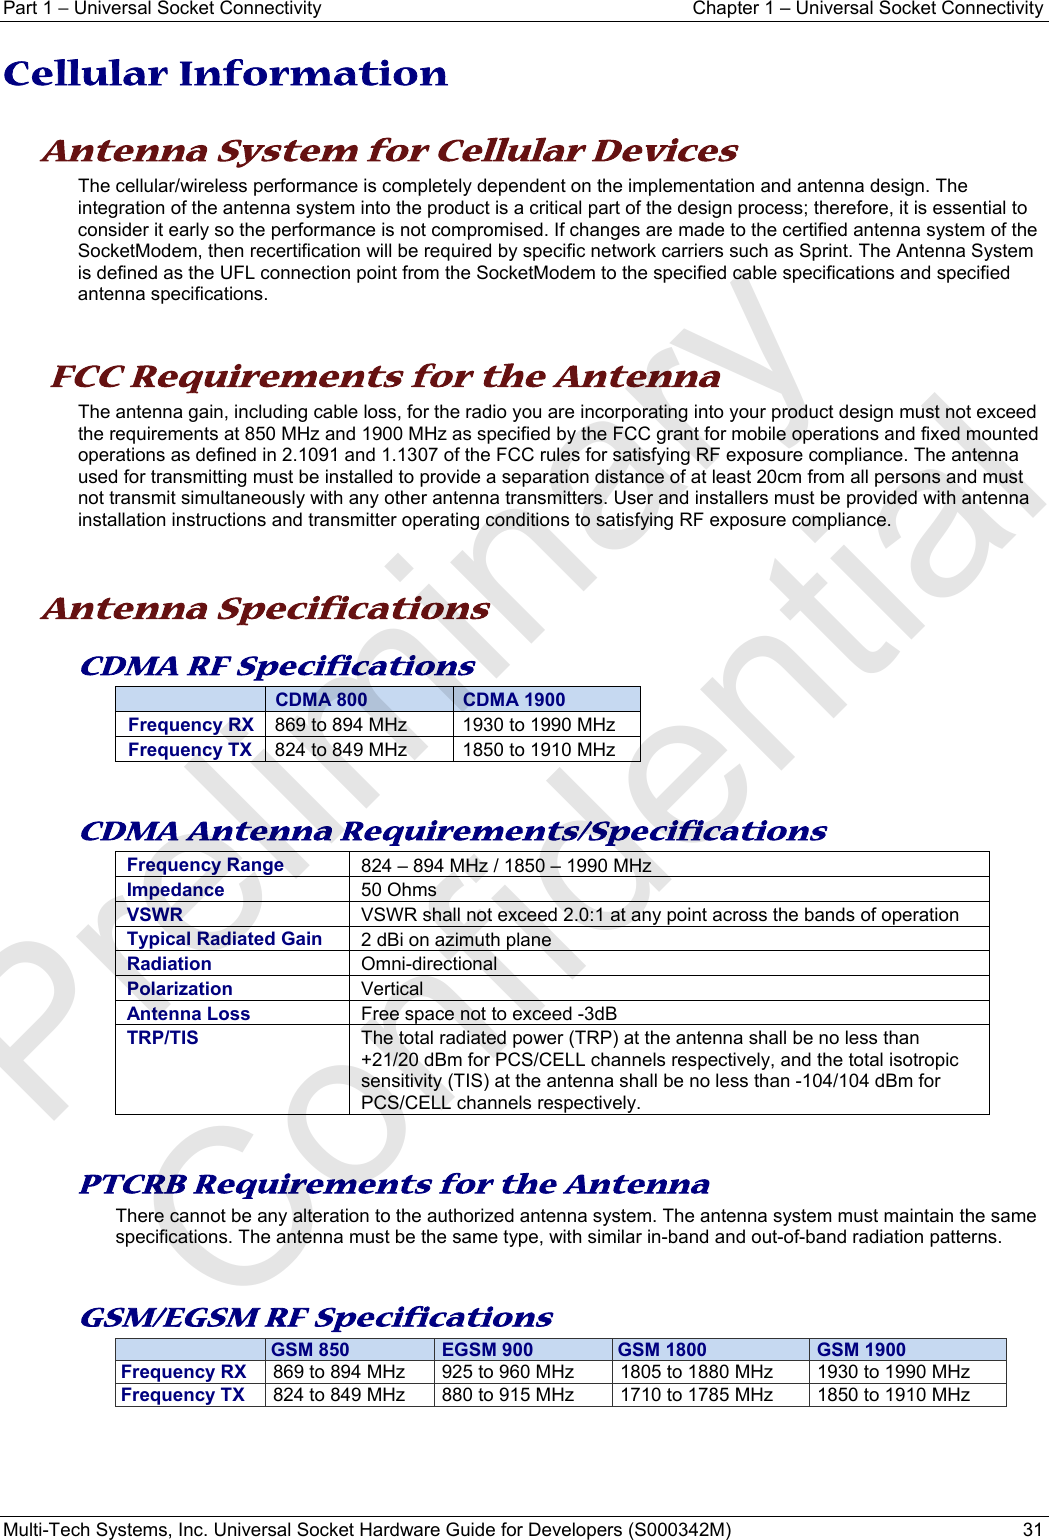 Part 1 − Universal Socket Connectivity  Chapter 1 – Universal Socket Connectivity Multi-Tech Systems, Inc. Universal Socket Hardware Guide for Developers (S000342M)  31  Cellular Information     Antenna System for Cellular Devices The cellular/wireless performance is completely dependent on the implementation and antenna design. The integration of the antenna system into the product is a critical part of the design process; therefore, it is essential to consider it early so the performance is not compromised. If changes are made to the certified antenna system of the SocketModem, then recertification will be required by specific network carriers such as Sprint. The Antenna System is defined as the UFL connection point from the SocketModem to the specified cable specifications and specified antenna specifications.    FCC Requirements for the Antenna The antenna gain, including cable loss, for the radio you are incorporating into your product design must not exceed the requirements at 850 MHz and 1900 MHz as specified by the FCC grant for mobile operations and fixed mounted operations as defined in 2.1091 and 1.1307 of the FCC rules for satisfying RF exposure compliance. The antenna used for transmitting must be installed to provide a separation distance of at least 20cm from all persons and must not transmit simultaneously with any other antenna transmitters. User and installers must be provided with antenna installation instructions and transmitter operating conditions to satisfying RF exposure compliance.    Antenna Specifications CDMA RF Specifications  CDMA 800  CDMA 1900 Frequency RX  869 to 894 MHz  1930 to 1990 MHz Frequency TX  824 to 849 MHz  1850 to 1910 MHz   CDMA Antenna Requirements/Specifications Frequency Range 824 – 894 MHz / 1850 – 1990 MHzImpedance 50 OhmsVSWR VSWR shall not exceed 2.0:1 at any point across the bands of operationTypical Radiated Gain  2 dBi on azimuth plane Radiation  Omni-directional Polarization  Vertical Antenna Loss  Free space not to exceed -3dB TRP/TIS  The total radiated power (TRP) at the antenna shall be no less than +21/20 dBm for PCS/CELL channels respectively, and the total isotropic sensitivity (TIS) at the antenna shall be no less than -104/104 dBm for PCS/CELL channels respectively.    PTCRB Requirements for the Antenna There cannot be any alteration to the authorized antenna system. The antenna system must maintain the same specifications. The antenna must be the same type, with similar in-band and out-of-band radiation patterns.   GSM/EGSM RF Specifications   GSM 850  EGSM 900 GSM 1800  GSM 1900Frequency RX   869 to 894 MHz   925 to 960 MHz   1805 to 1880 MHz   1930 to 1990 MHz Frequency TX   824 to 849 MHz   880 to 915 MHz   1710 to 1785 MHz   1850 to 1910 MHz    Preliminary  Confidential